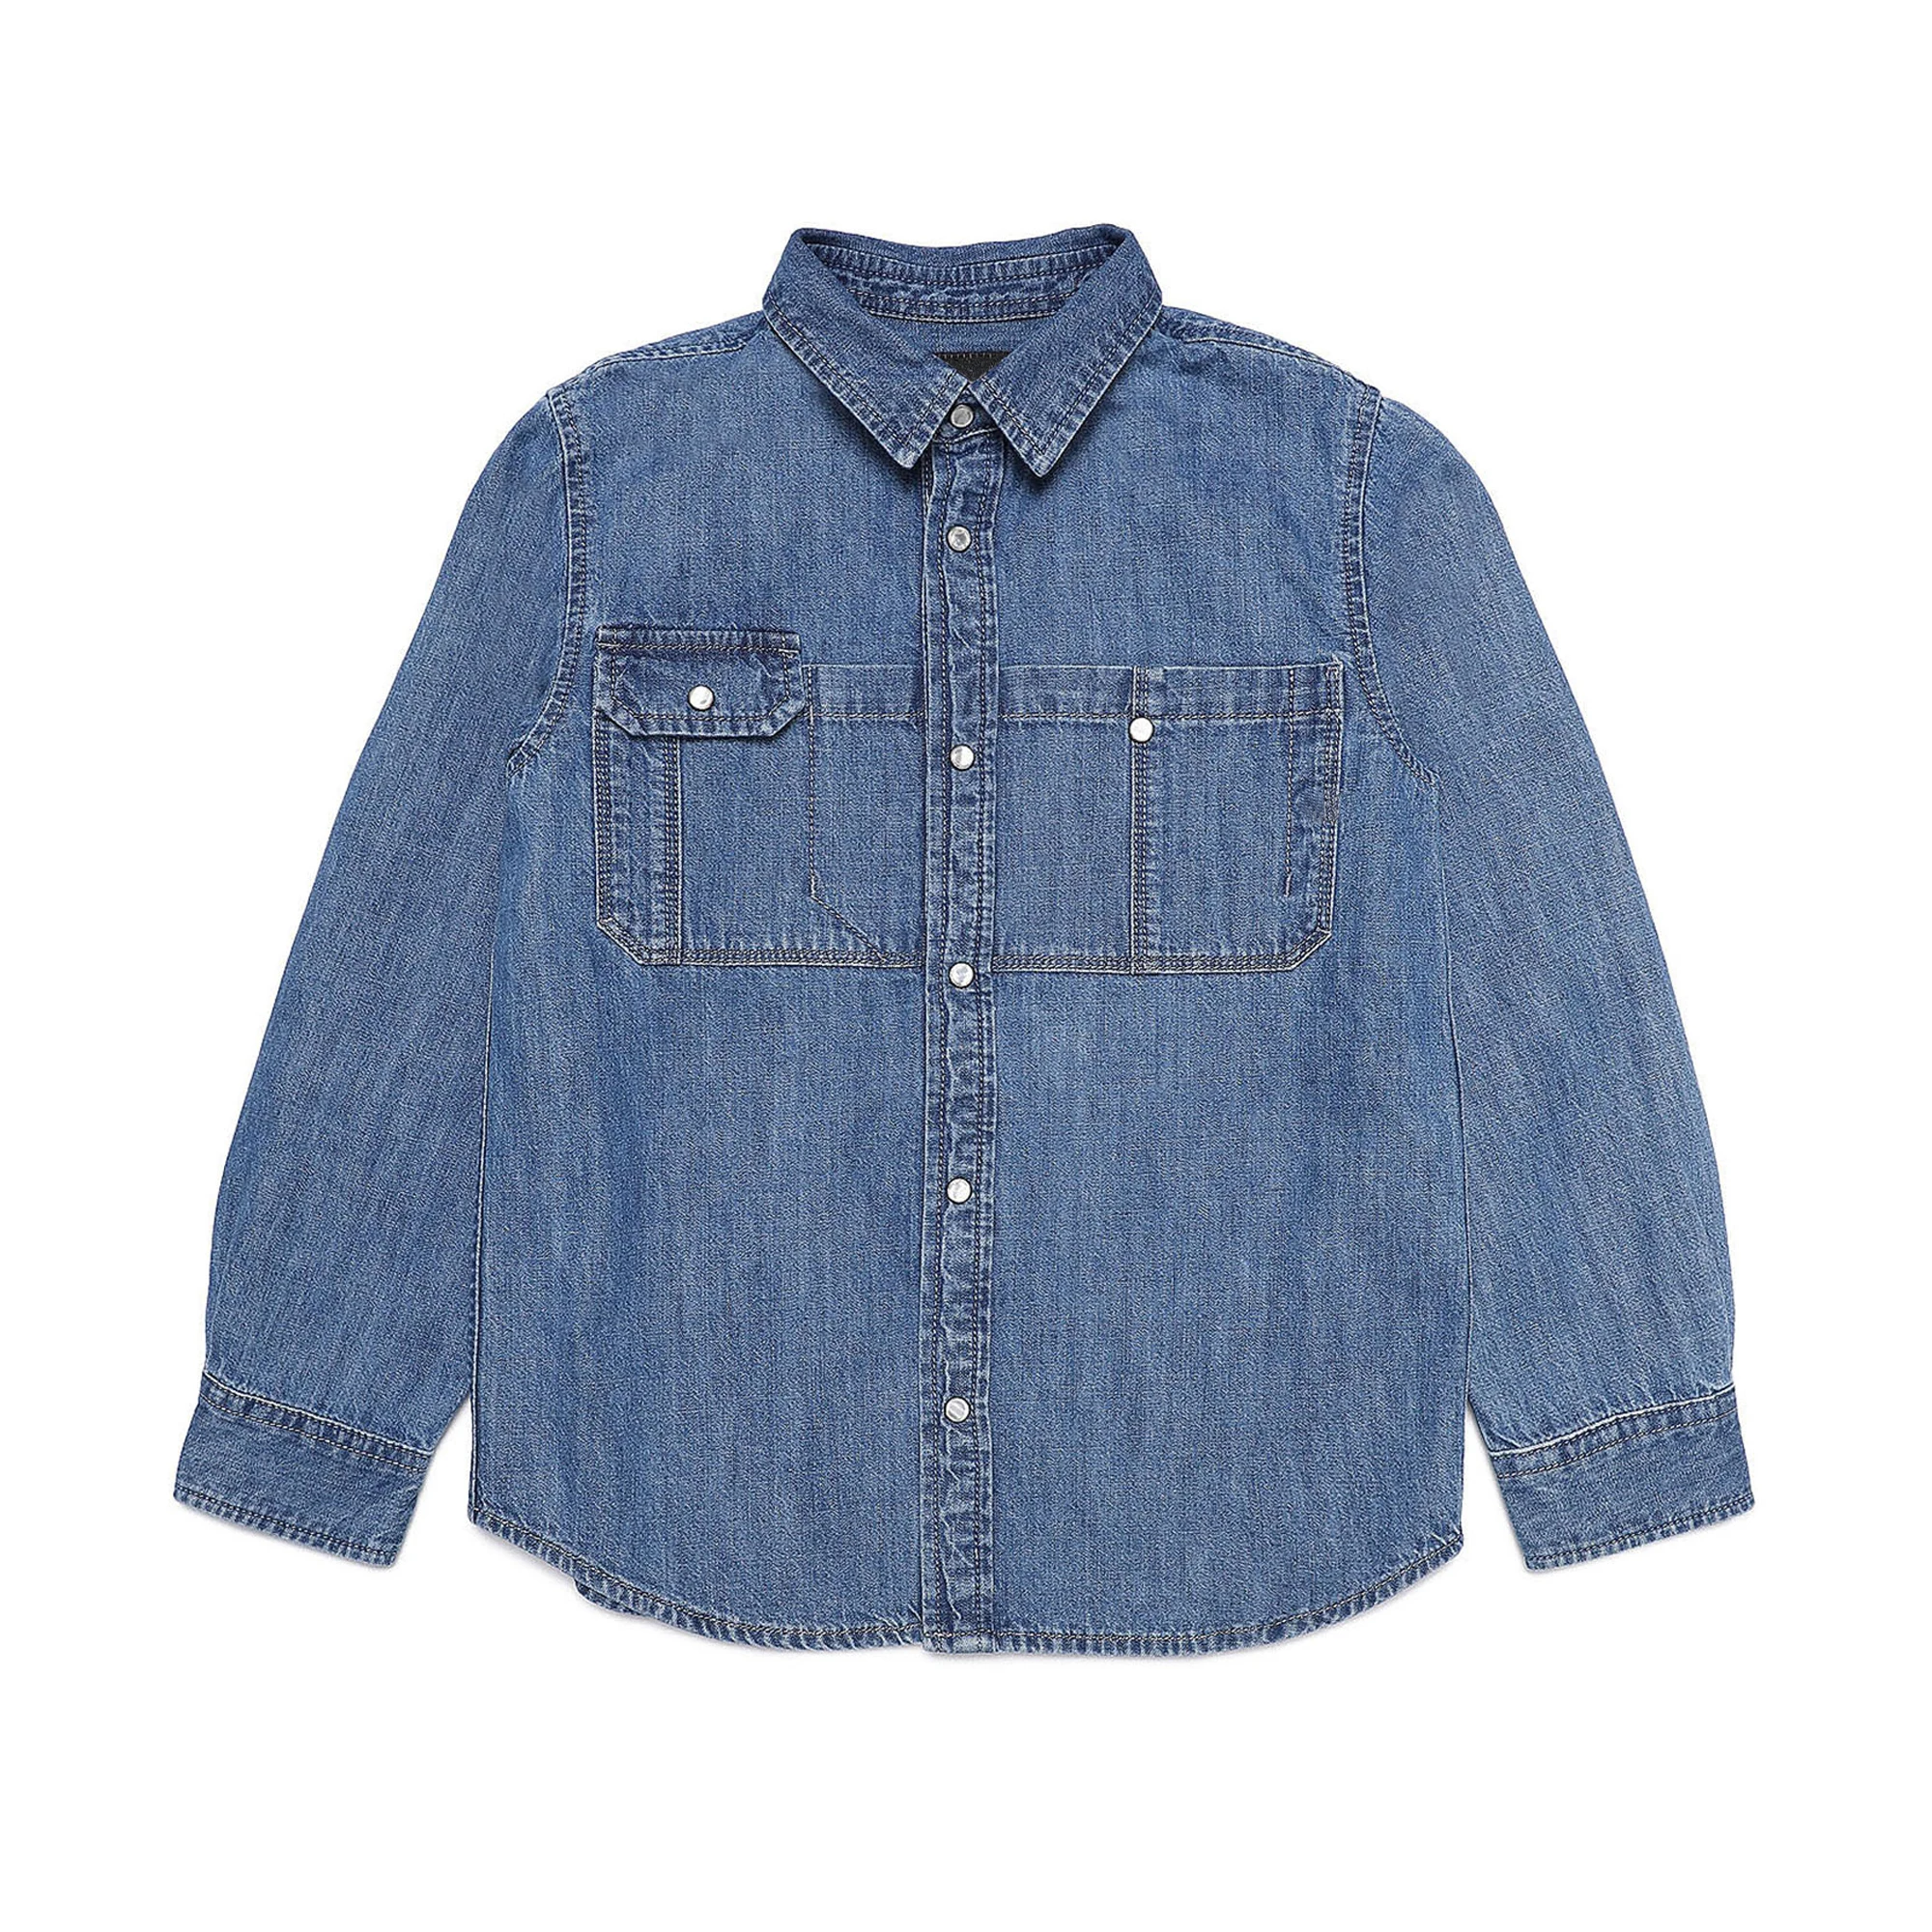 Custom latest design kids shirts boys washable chambray light denim long sleeve boys shirts with front button down